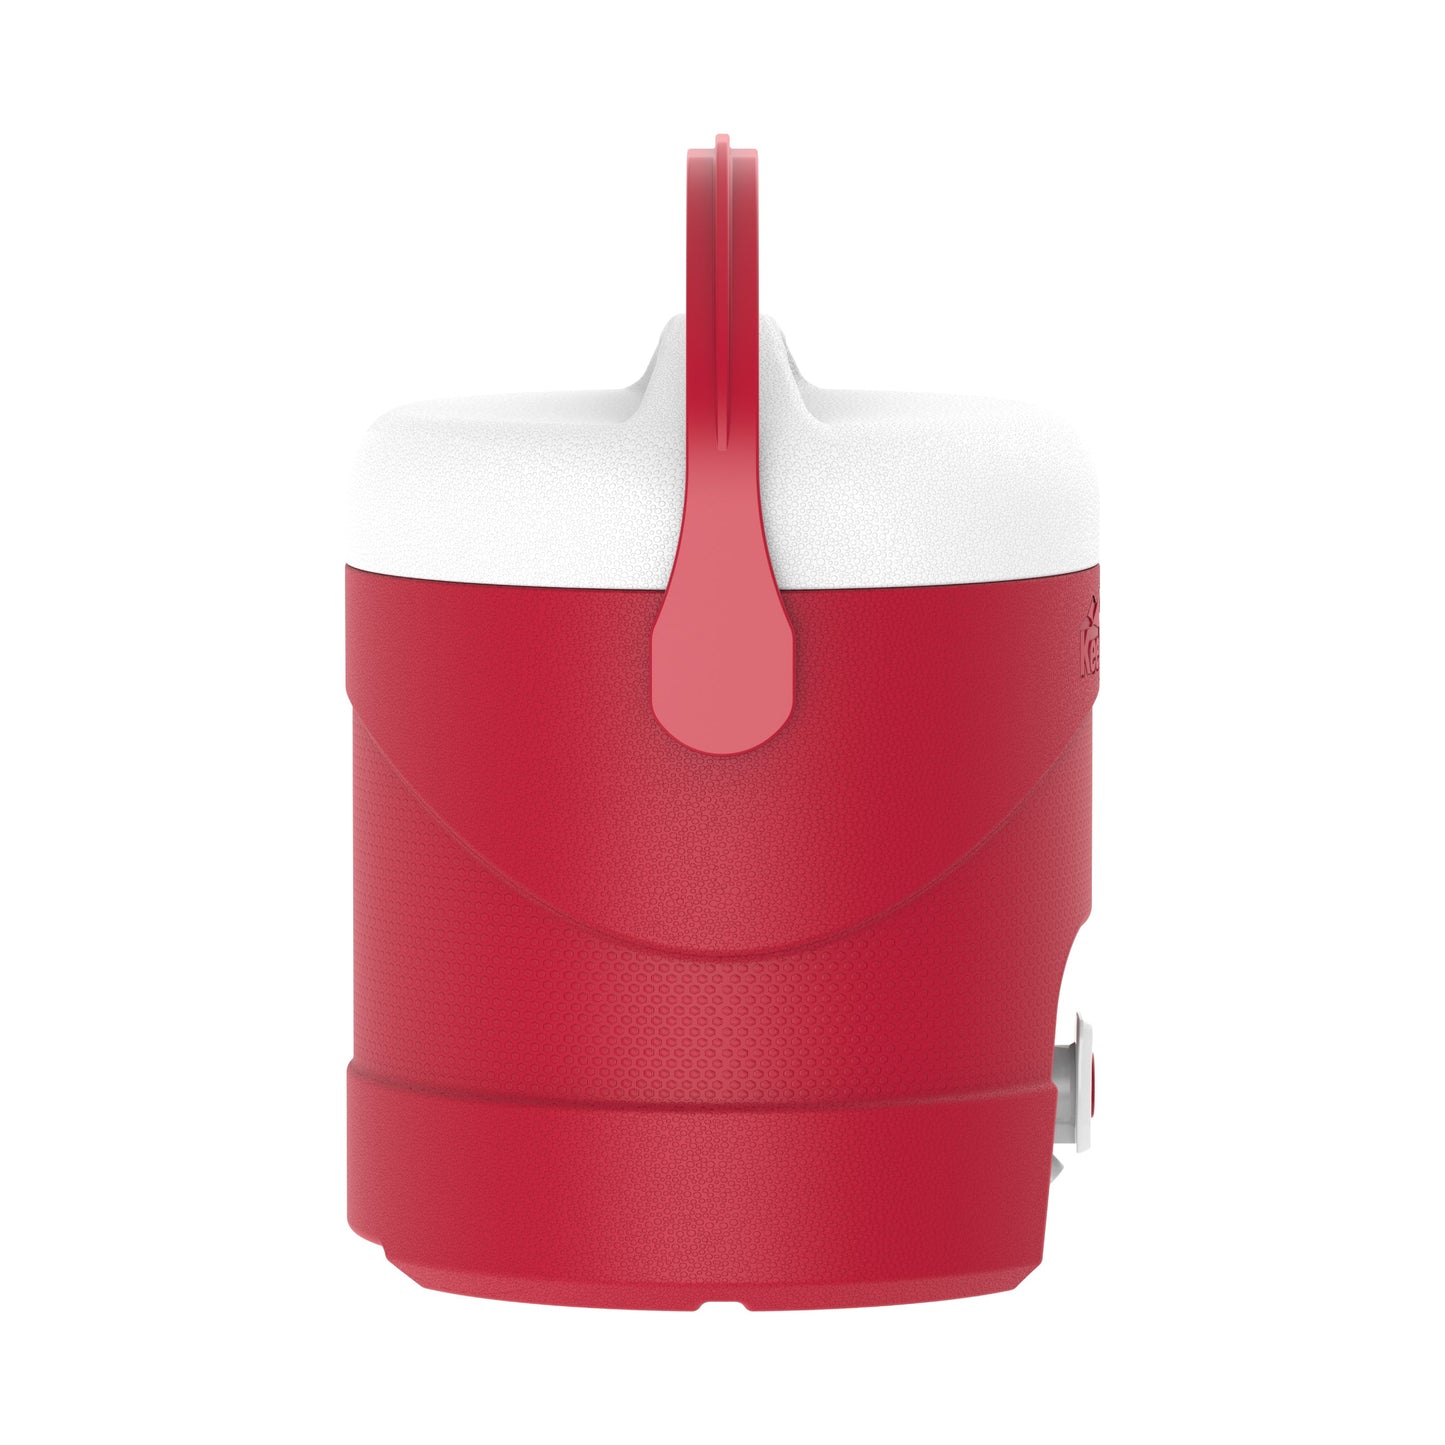 12L KeepCold Picnic Water Cooler - Cosmoplast Kuwait